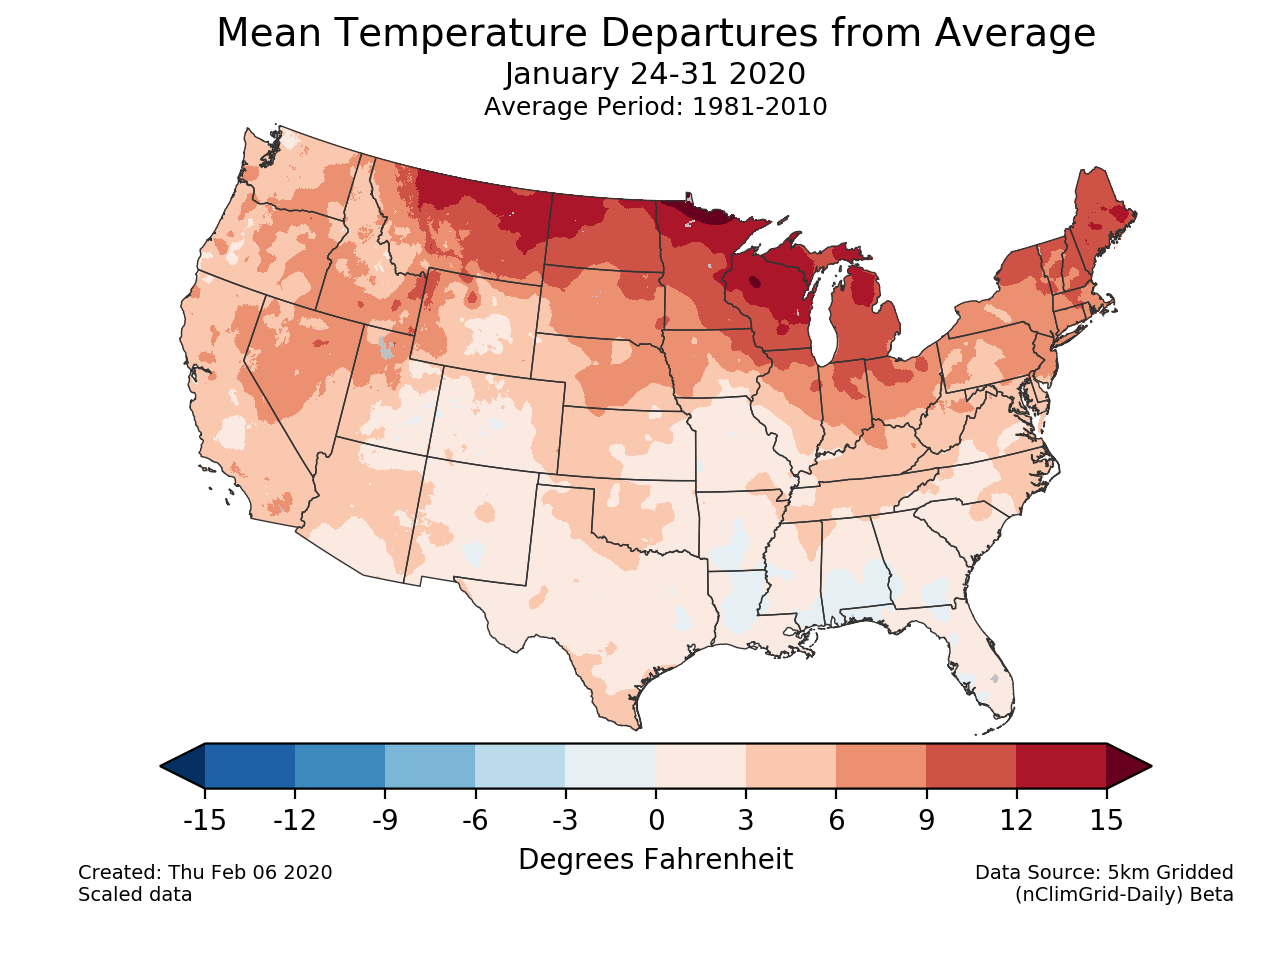 Temperature anomalies (departure from normal) for the CONUS for January 24-31 2020